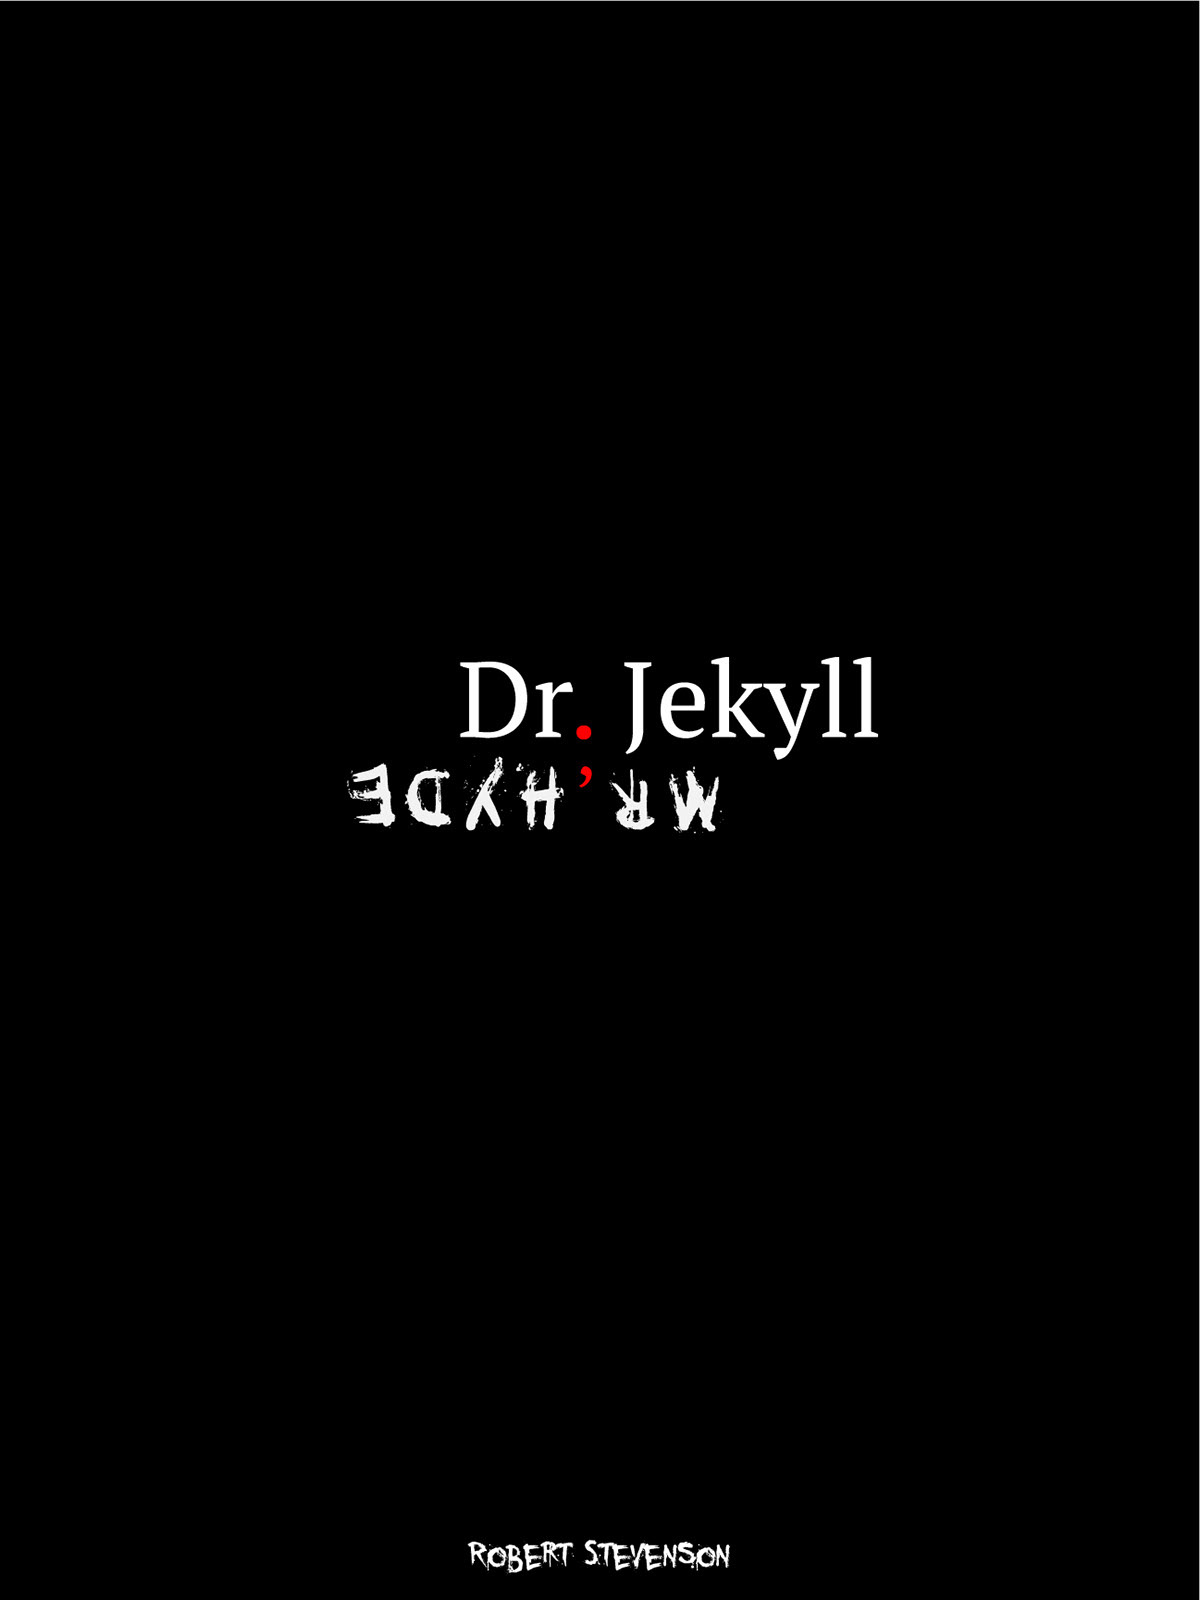 book dark type dr jekyll mr hyde book cover black White two-faced